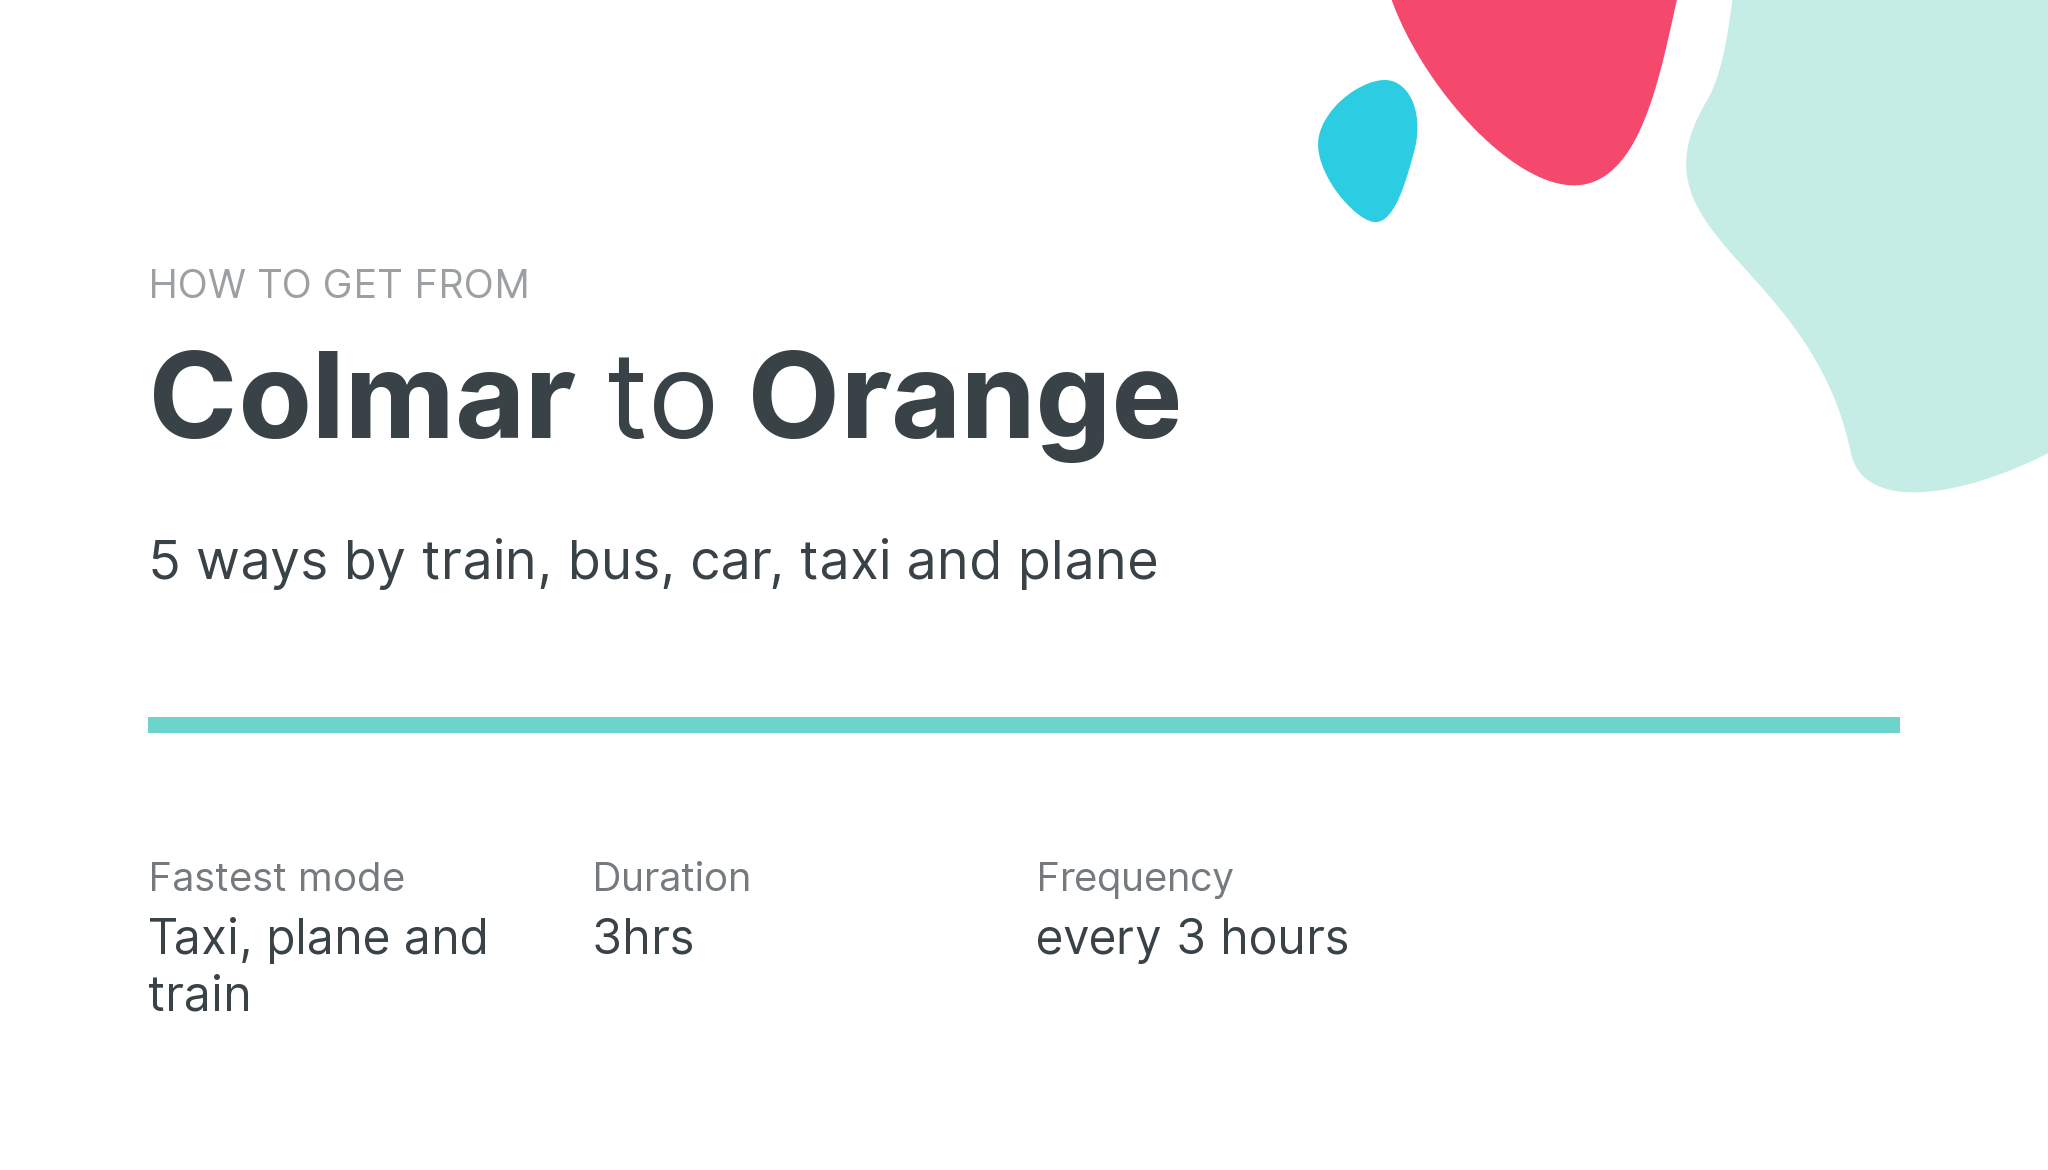 How do I get from Colmar to Orange